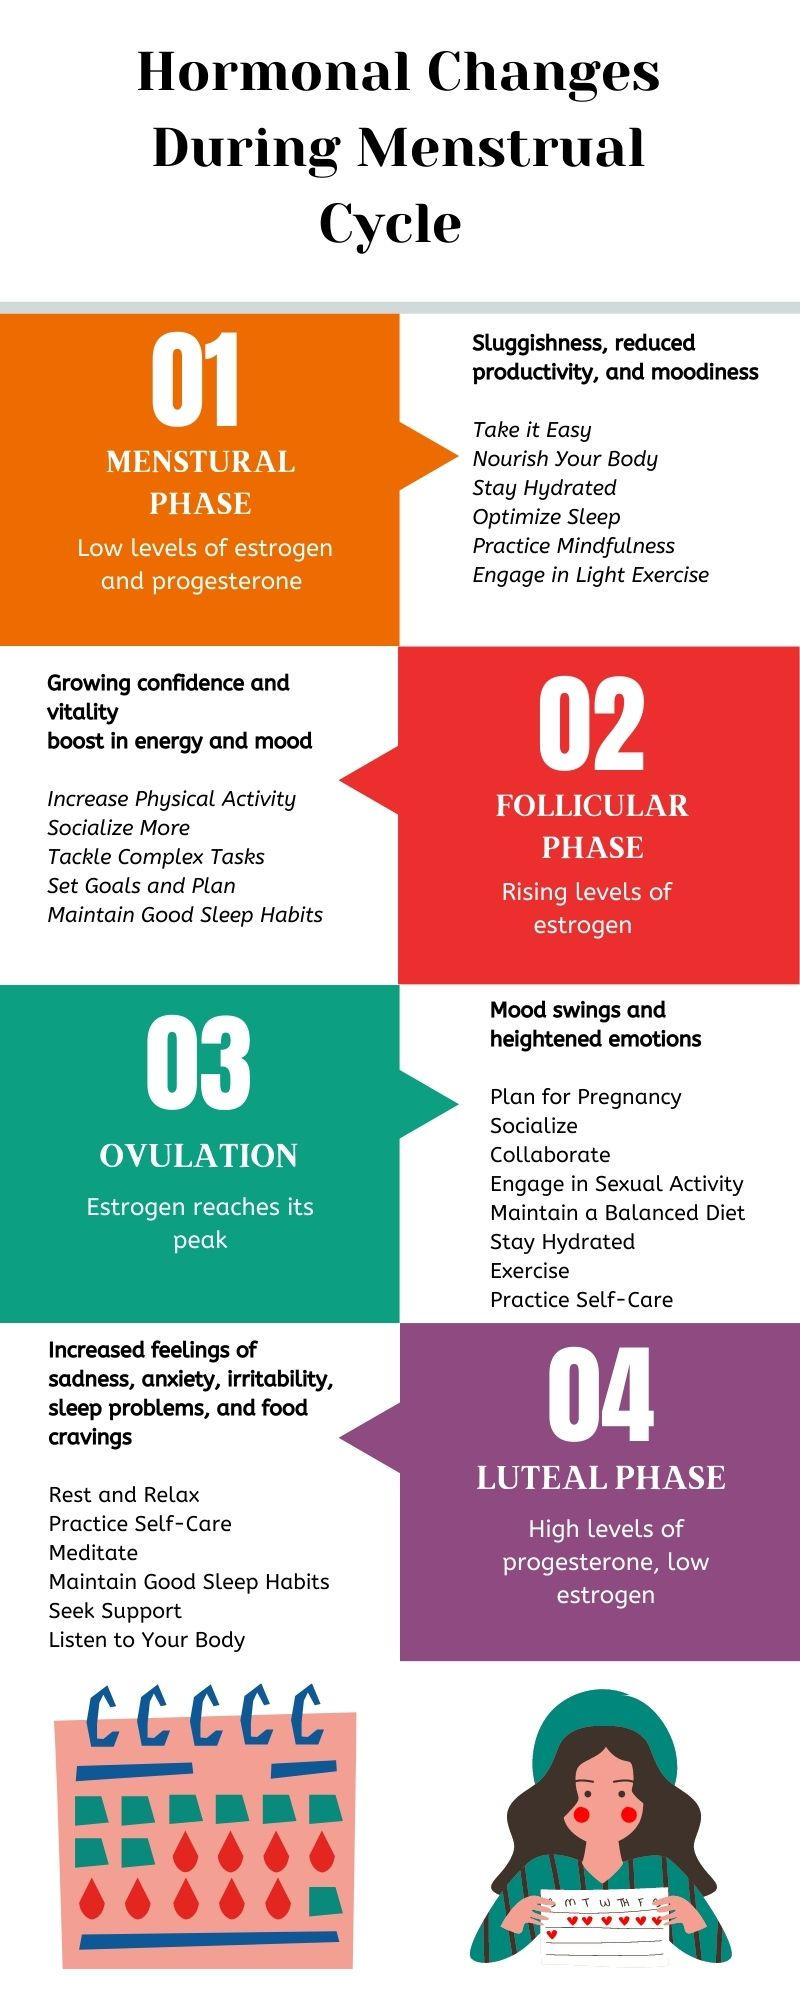 "Infographic explaining changes in hormones and energy levels during menstrual cycle"